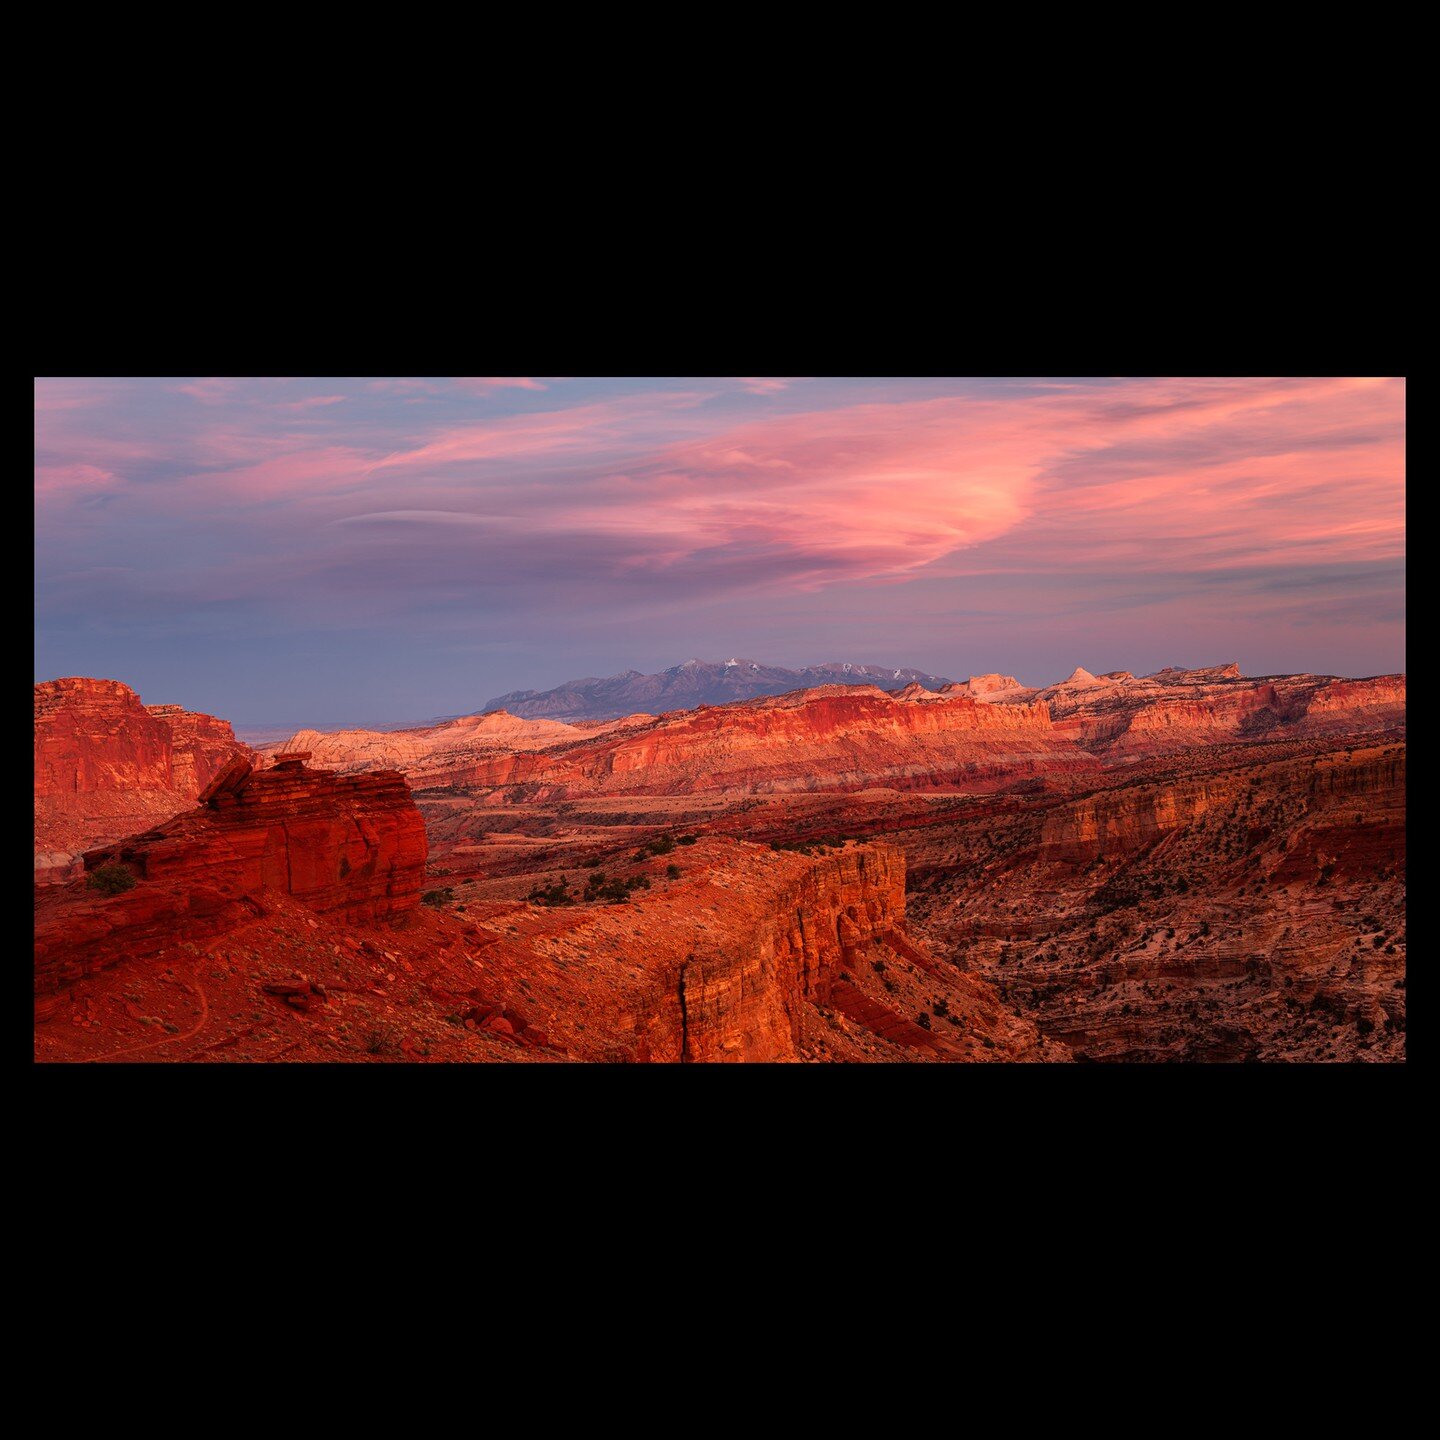 Sunset View, Capitol Reef National Park, 2021
https://www.lussierphotography.com/the-blog/sunset-view
It was an amazing light show.
.
.
. 
#nationalpark #mountains #sunset #alpenglow #capitalreefnationalpark